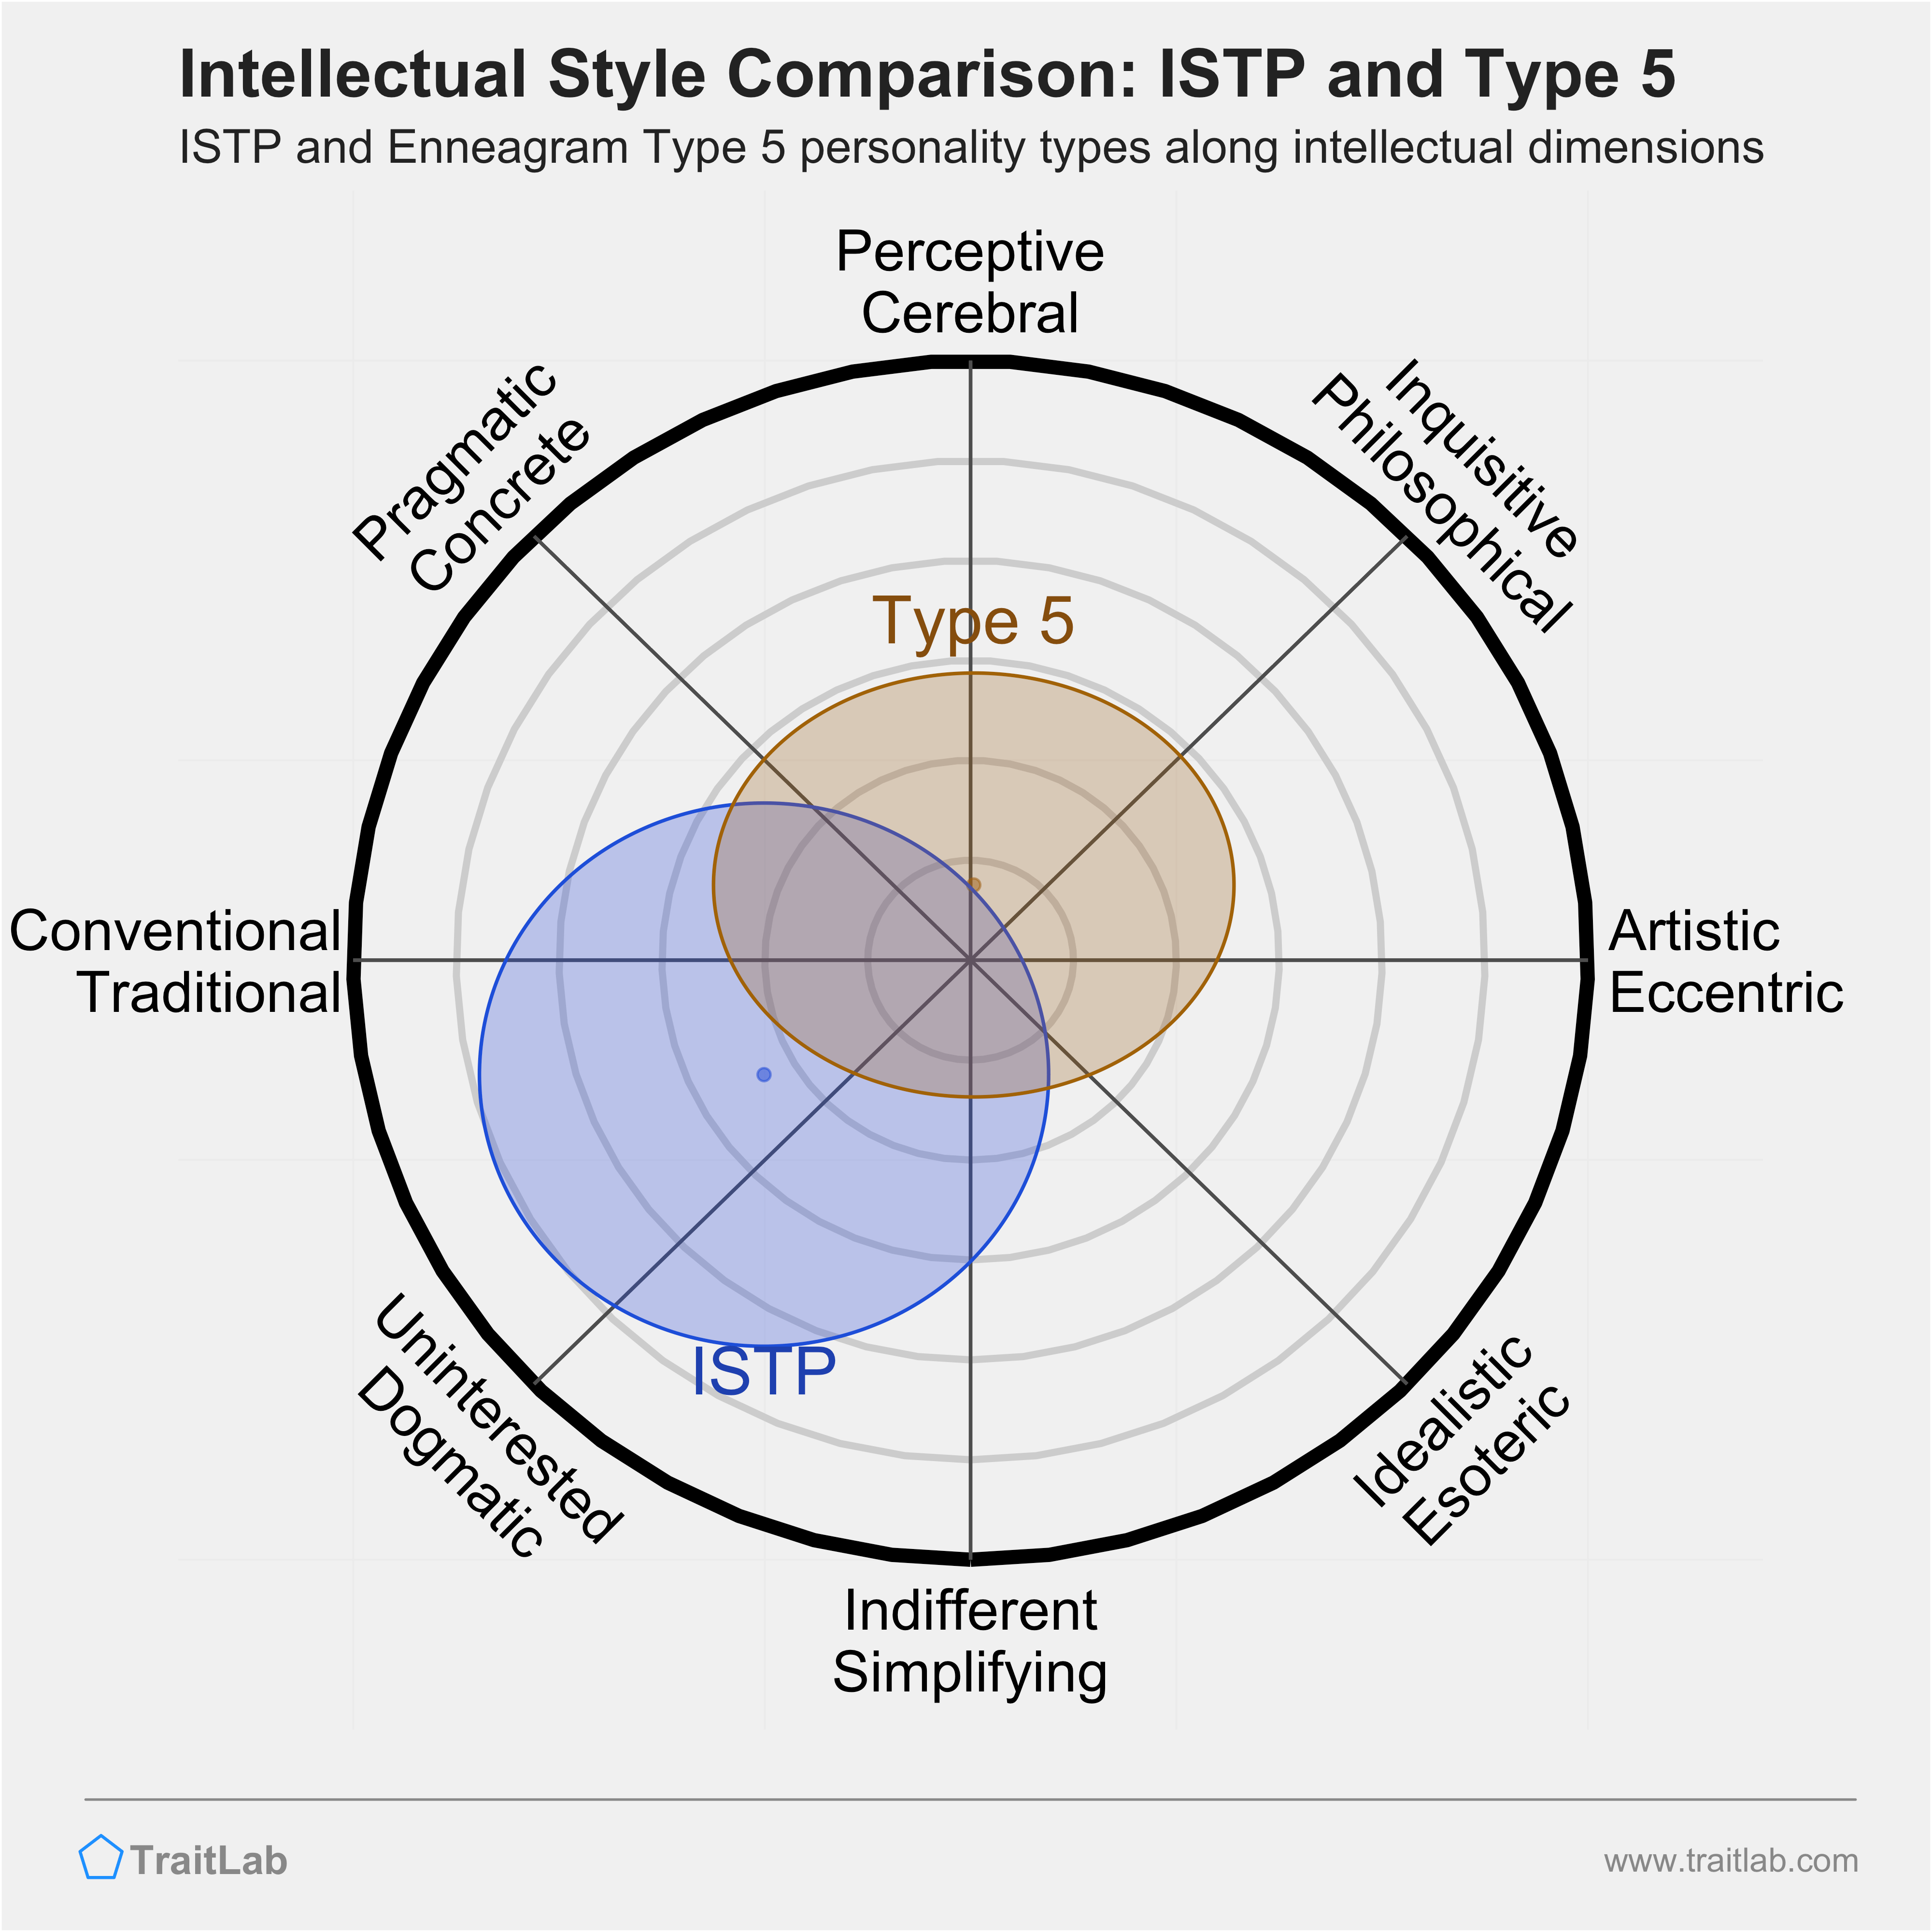 ISTP and Type 5 comparison across intellectual dimensions